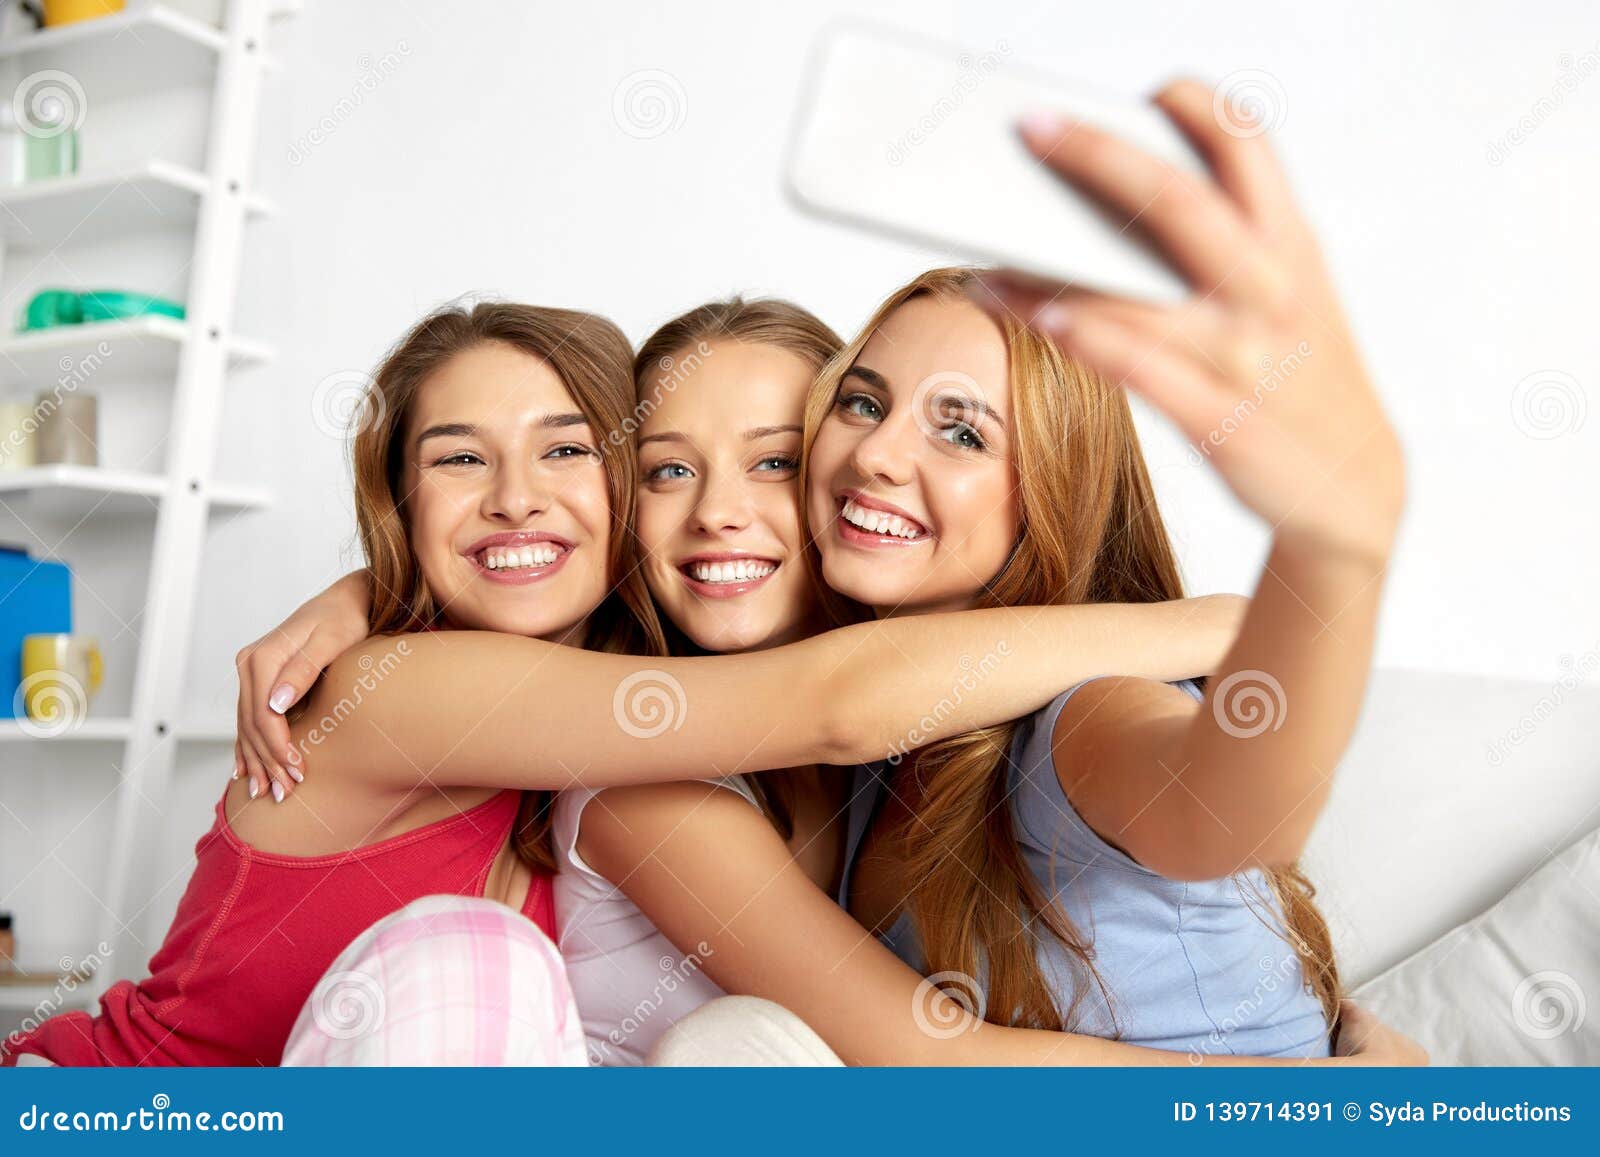 Teenage Girls Taking Selfie by Smartphone at Home Stock Image - Image ...